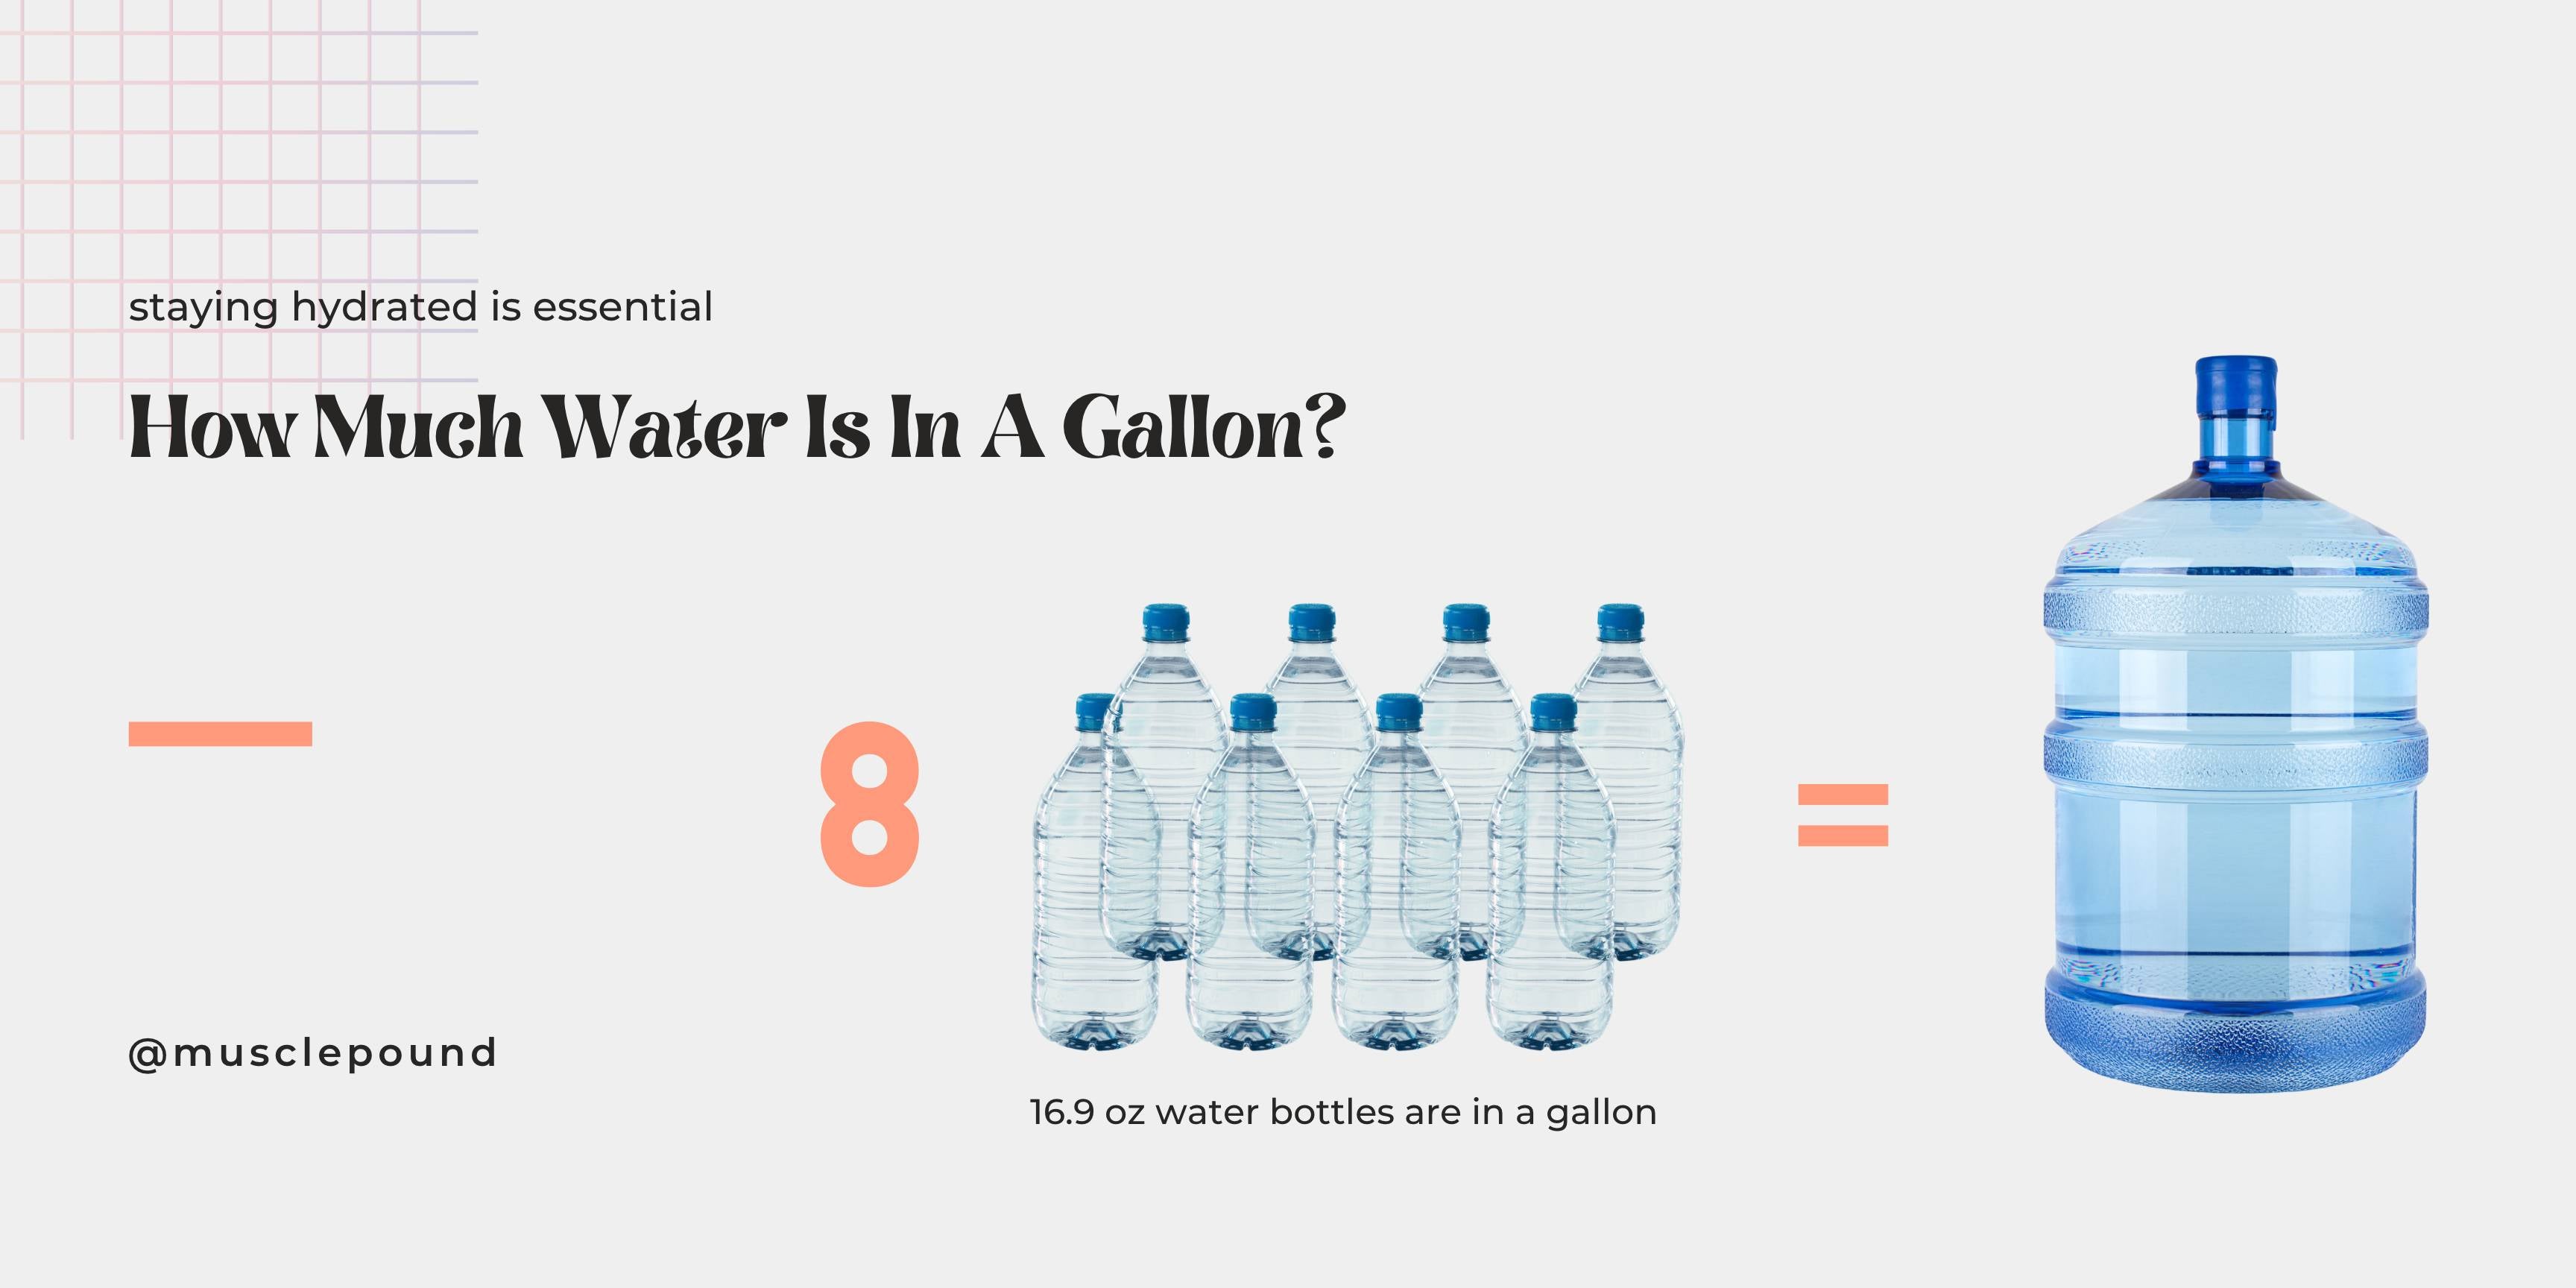 Why You Should Have a Reusable Water Bottle - Goodnet